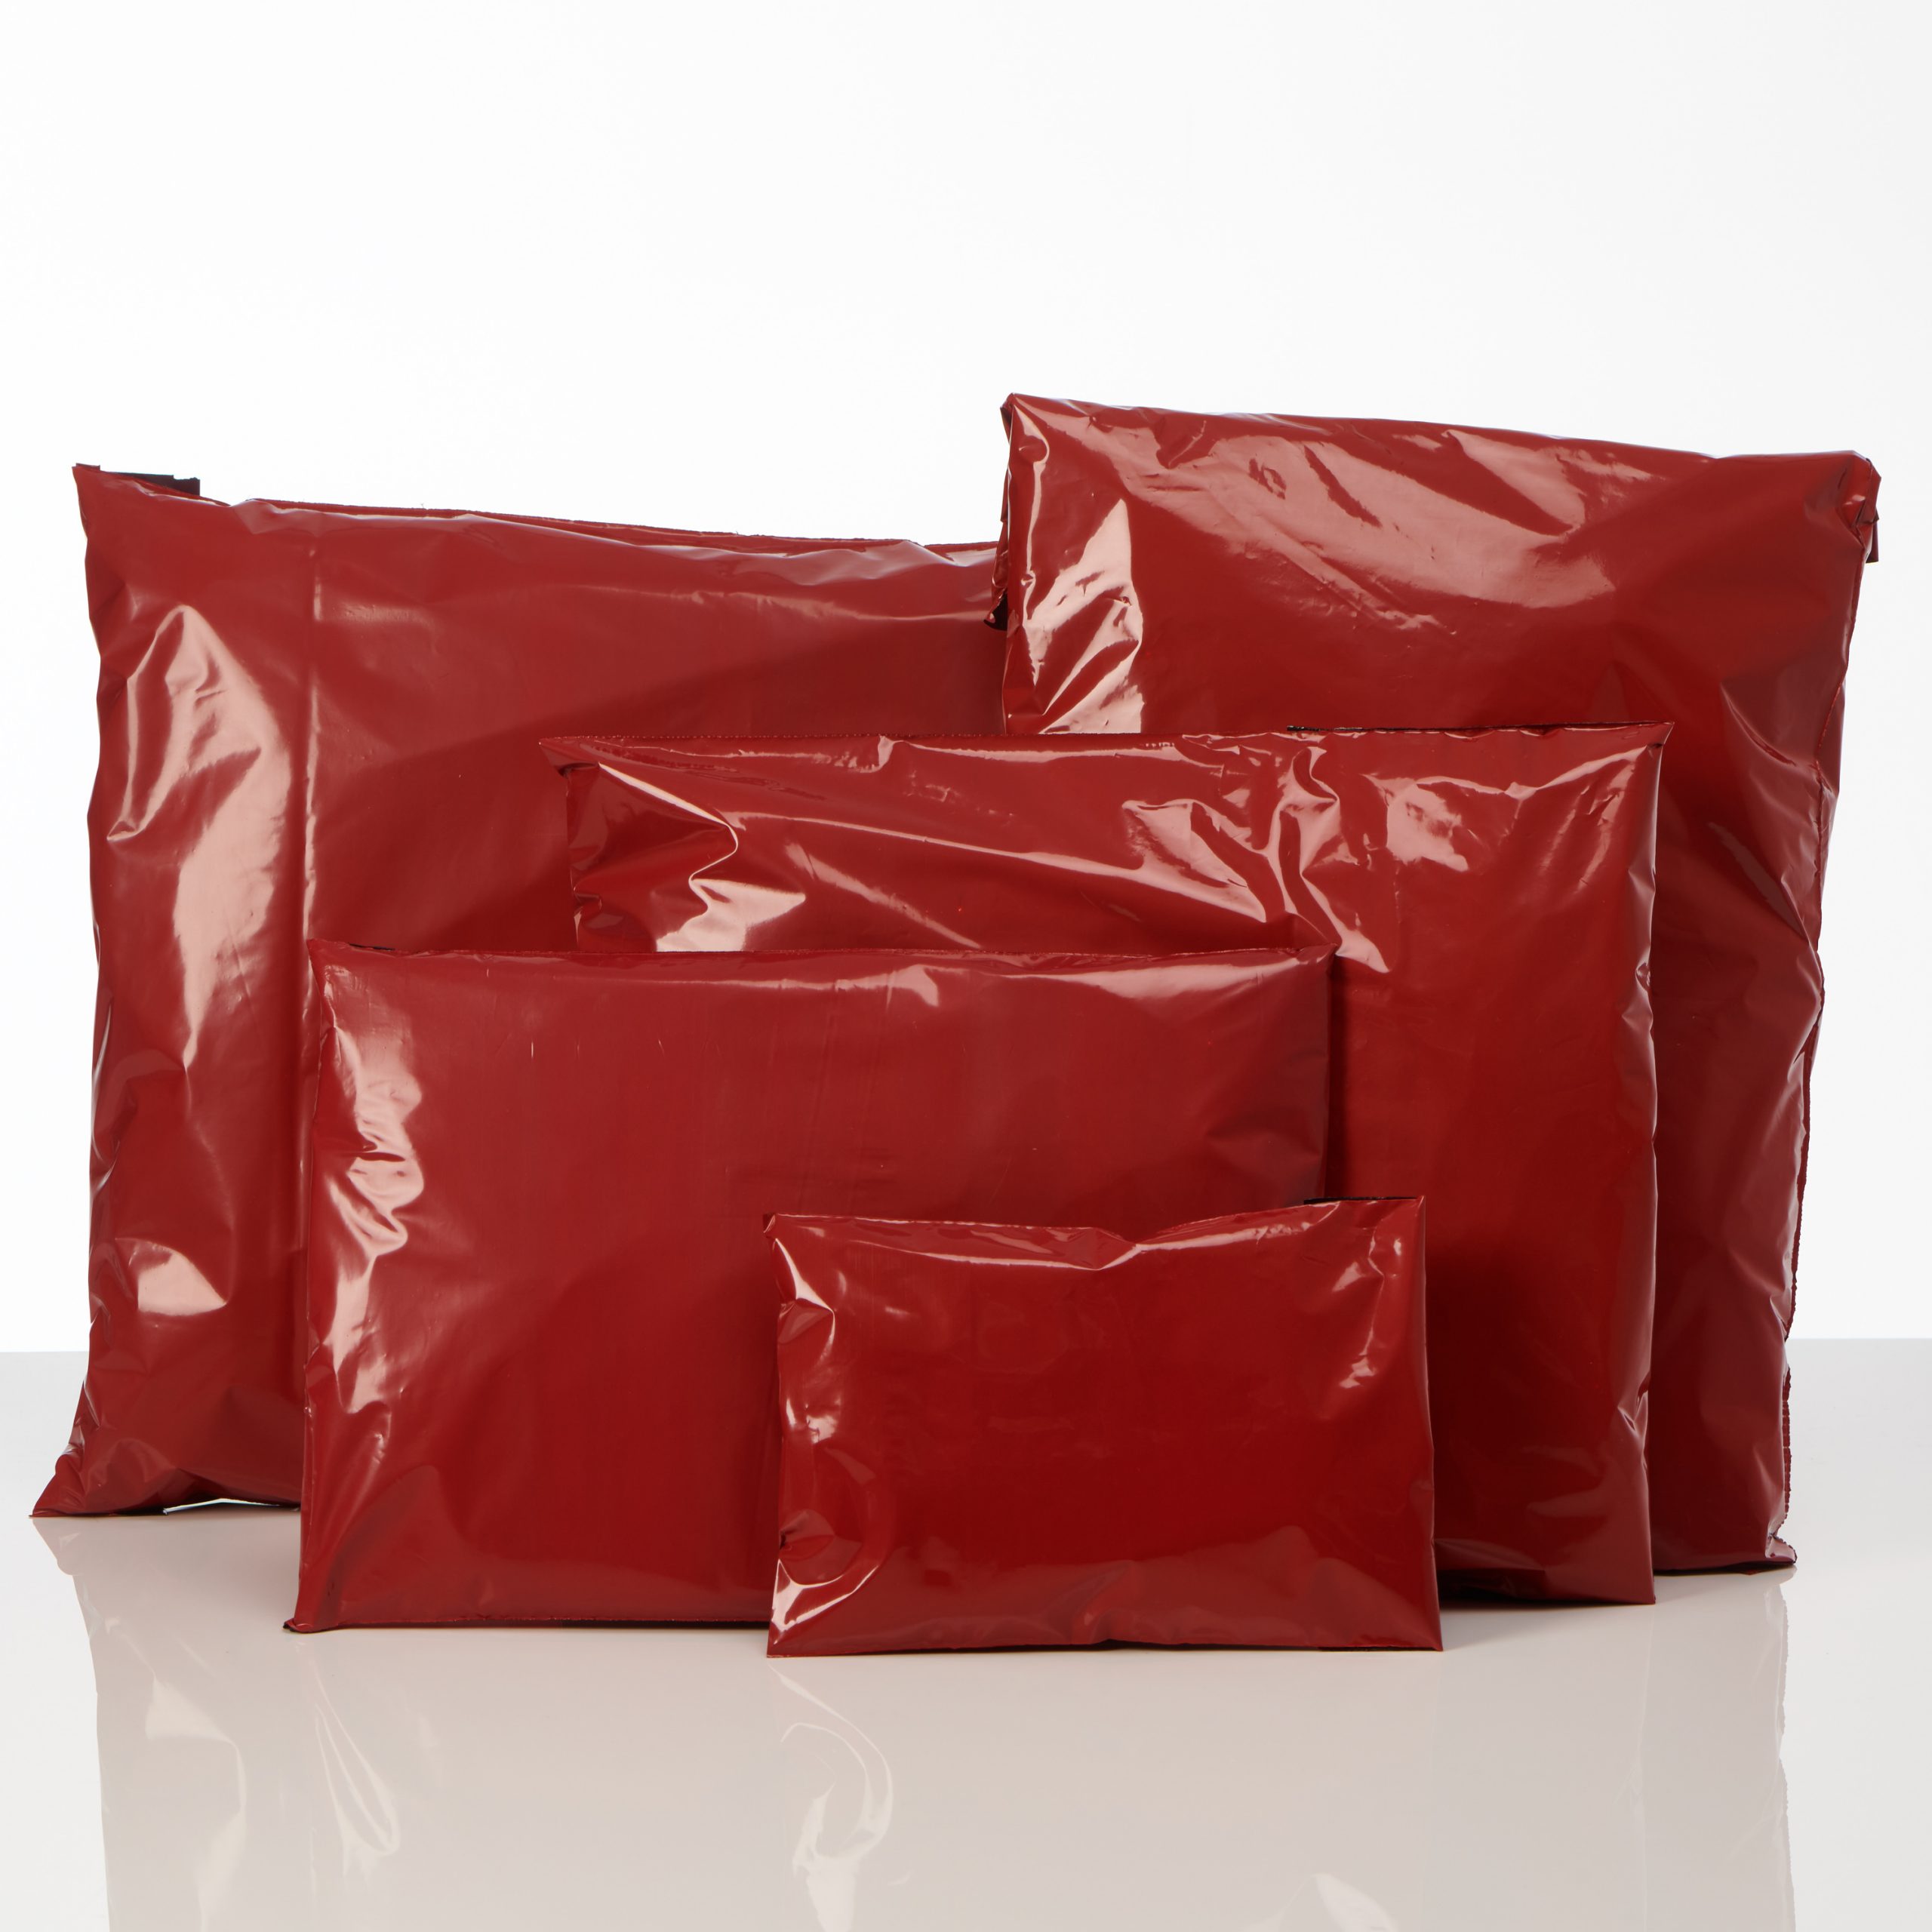 RED Postal Postage Mailing Poly Bags 10 x 14 250x350 10 20 50 100 200 plastic 